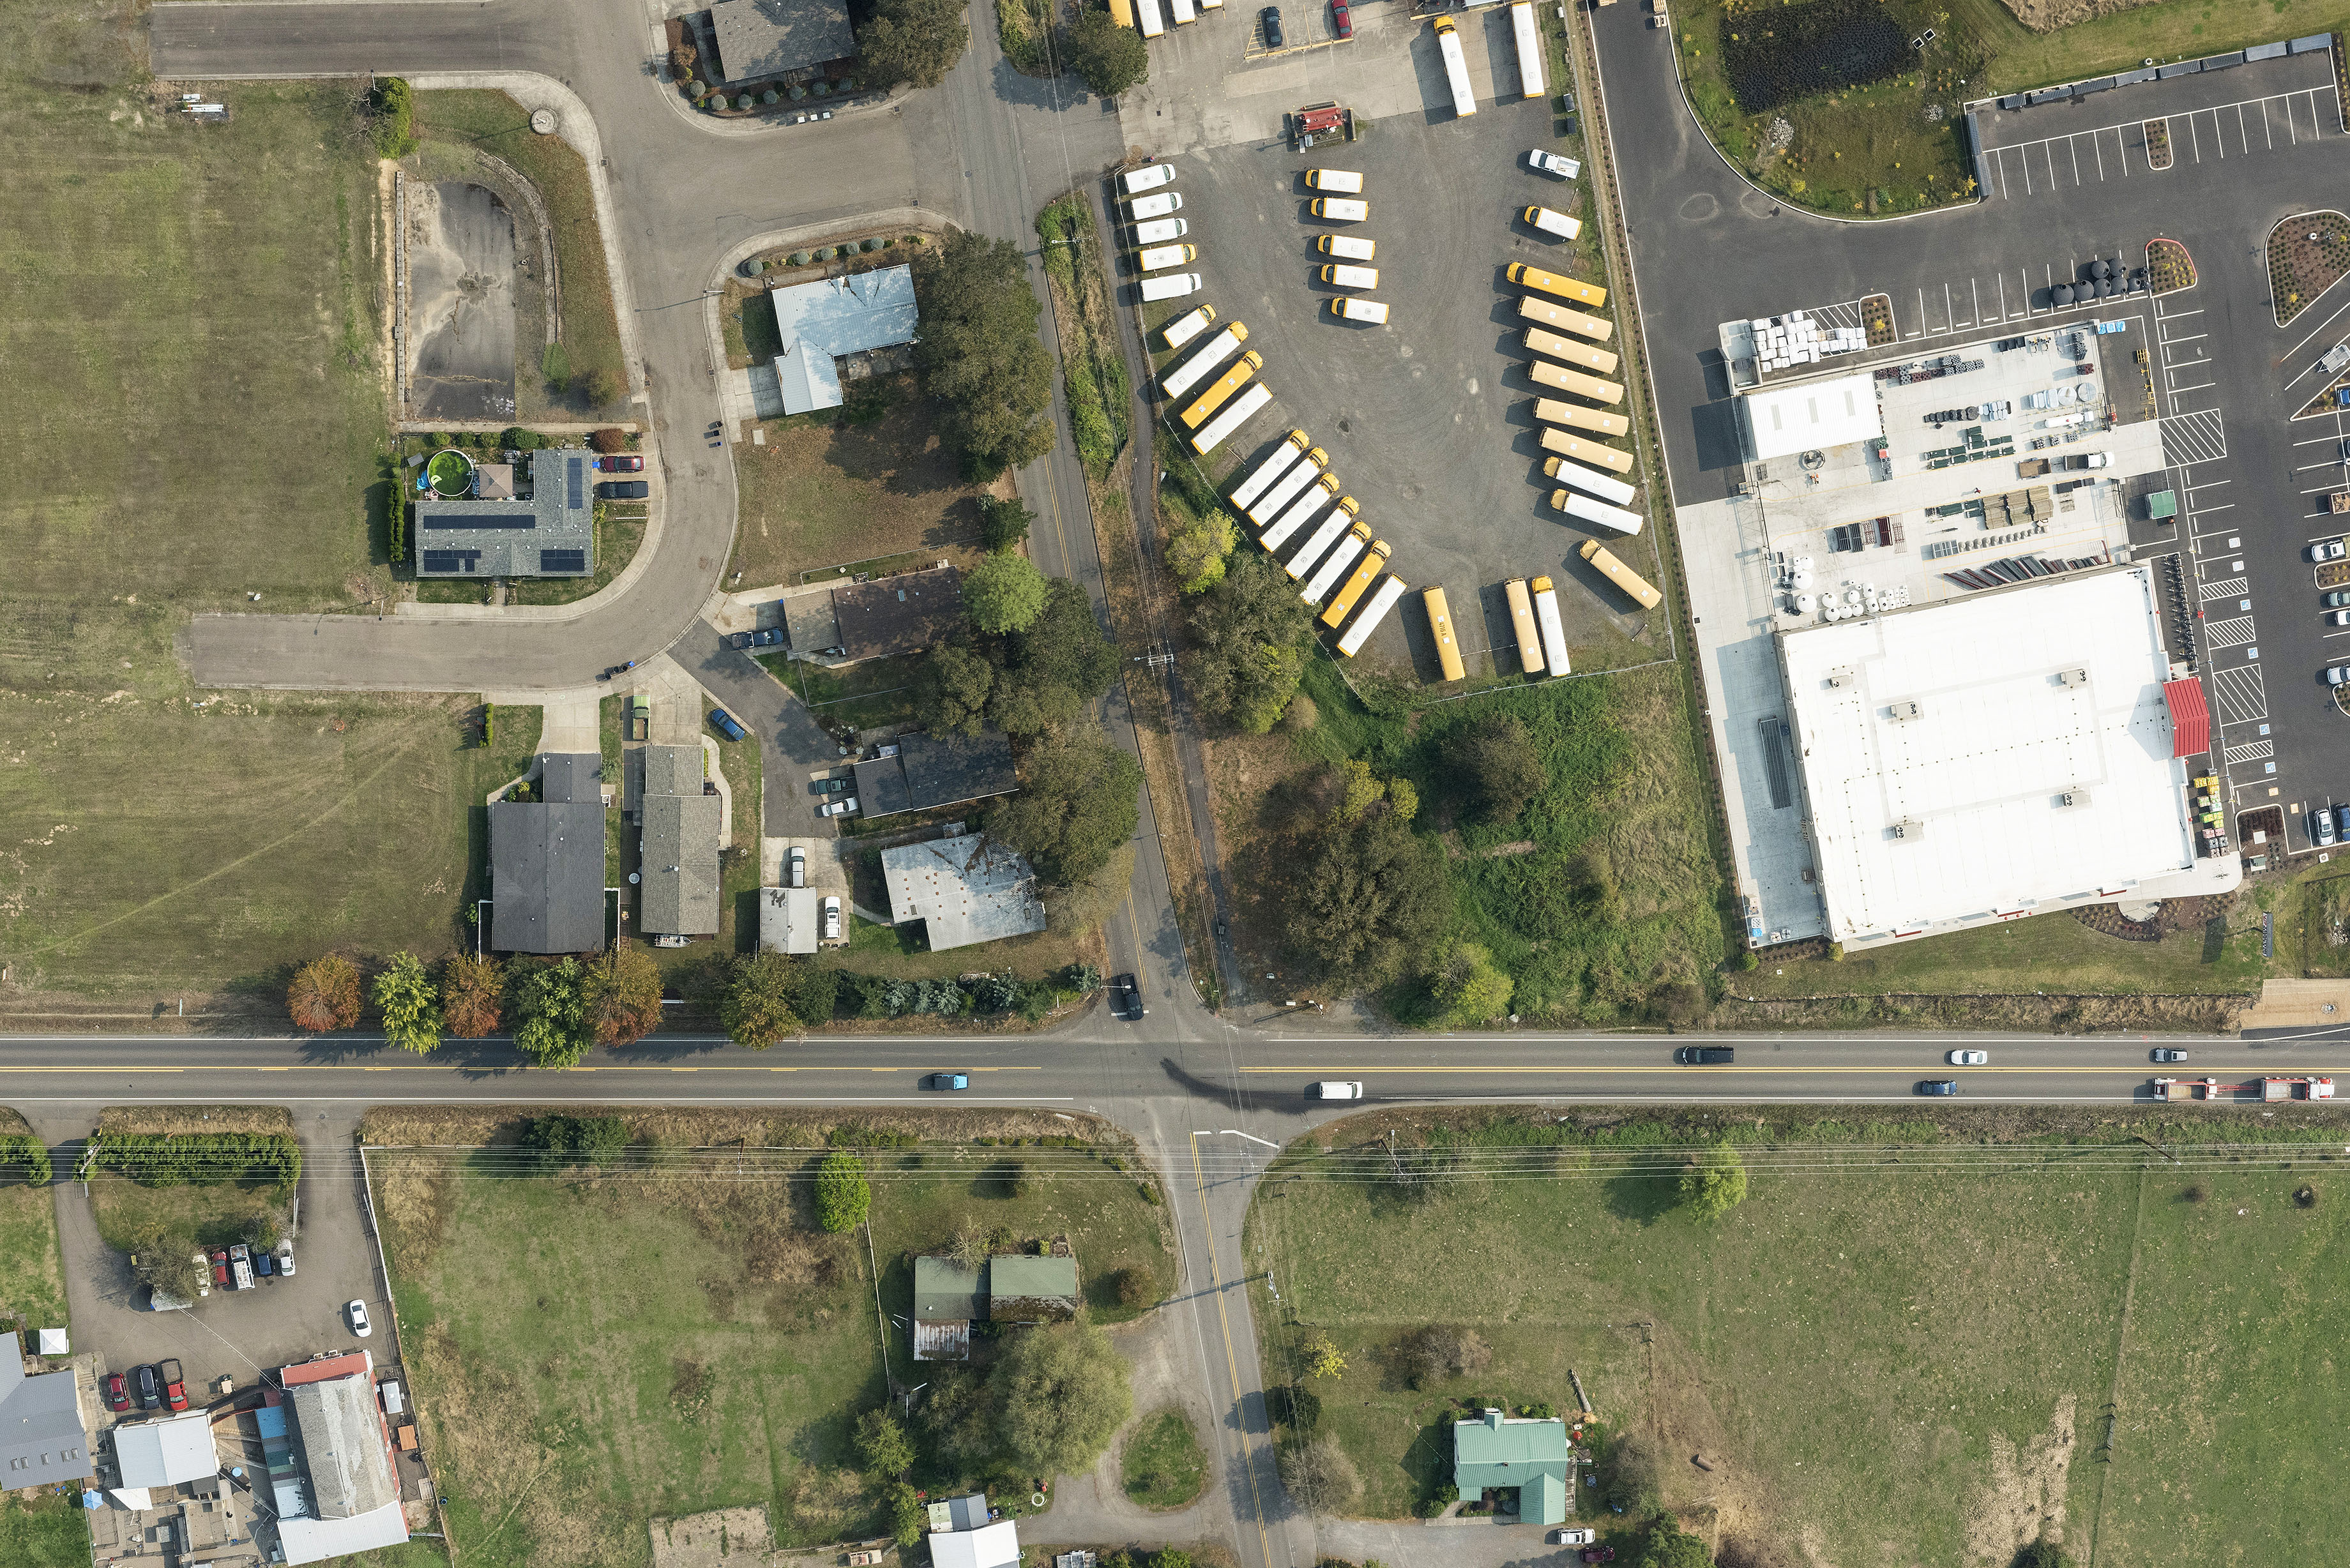 An aerial view of the intersection of OR 213 and Toliver Road.